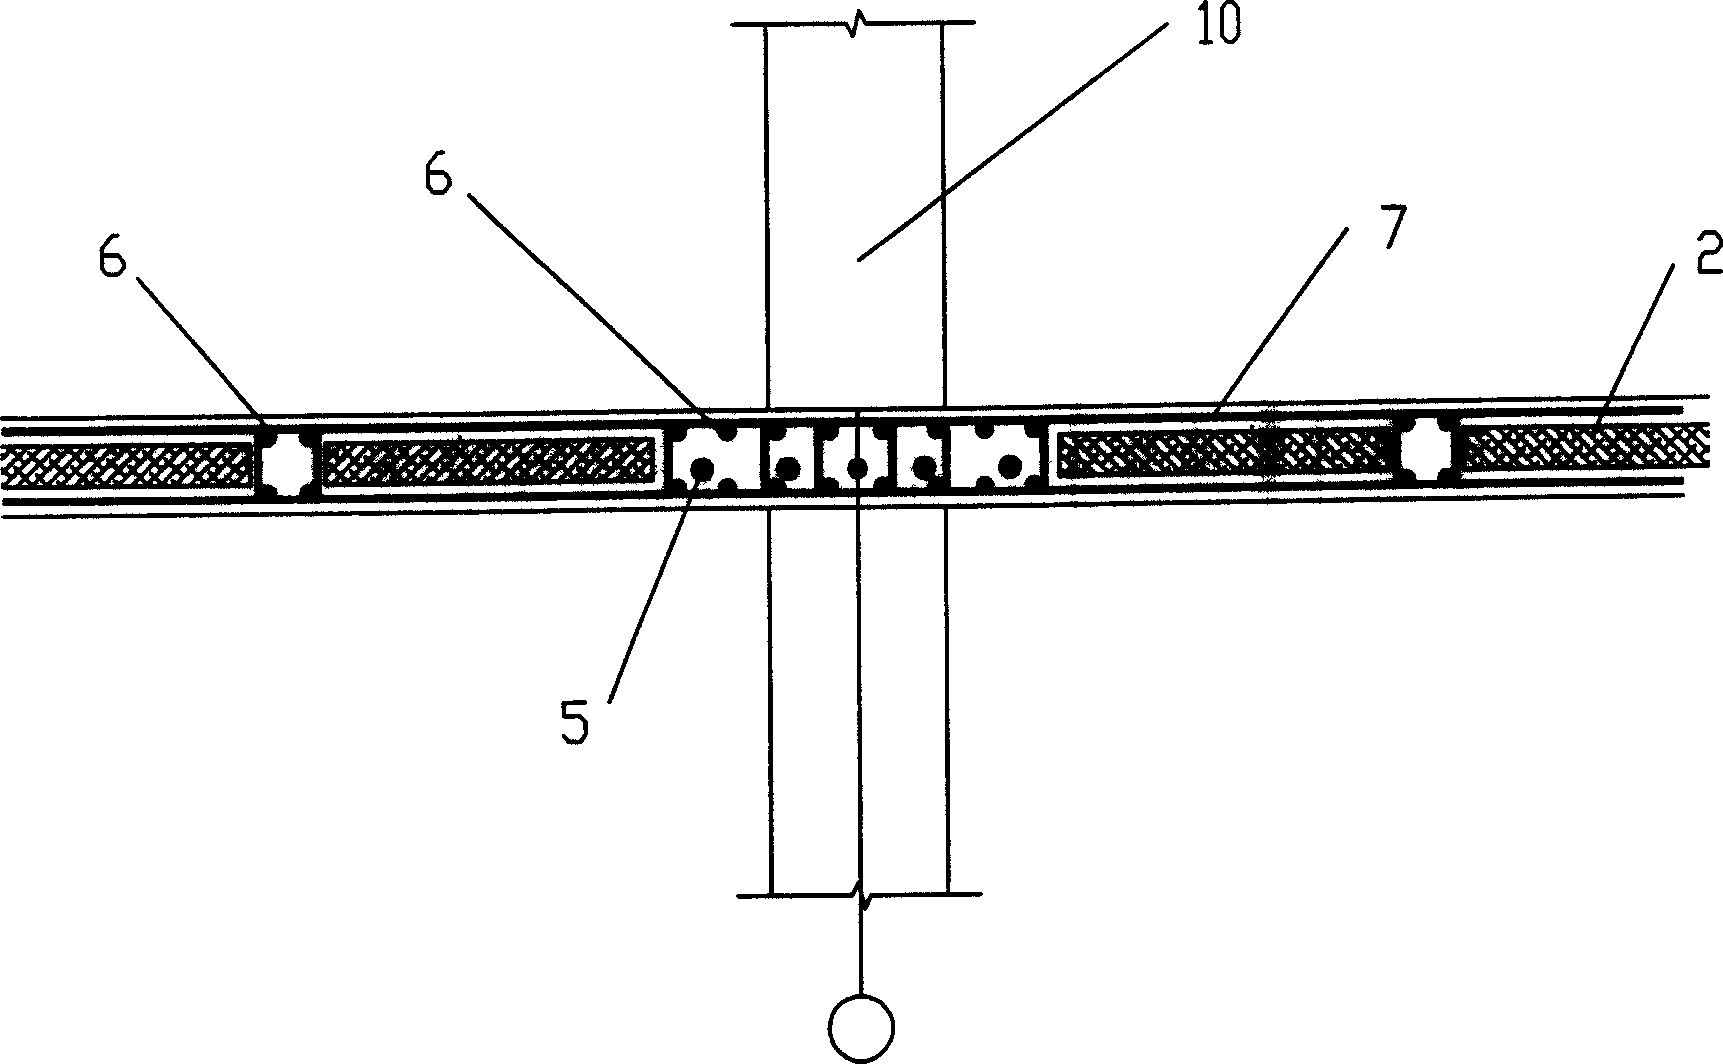 In-site prestressed concrete sandwiched composite beamless floor structure system and construction method